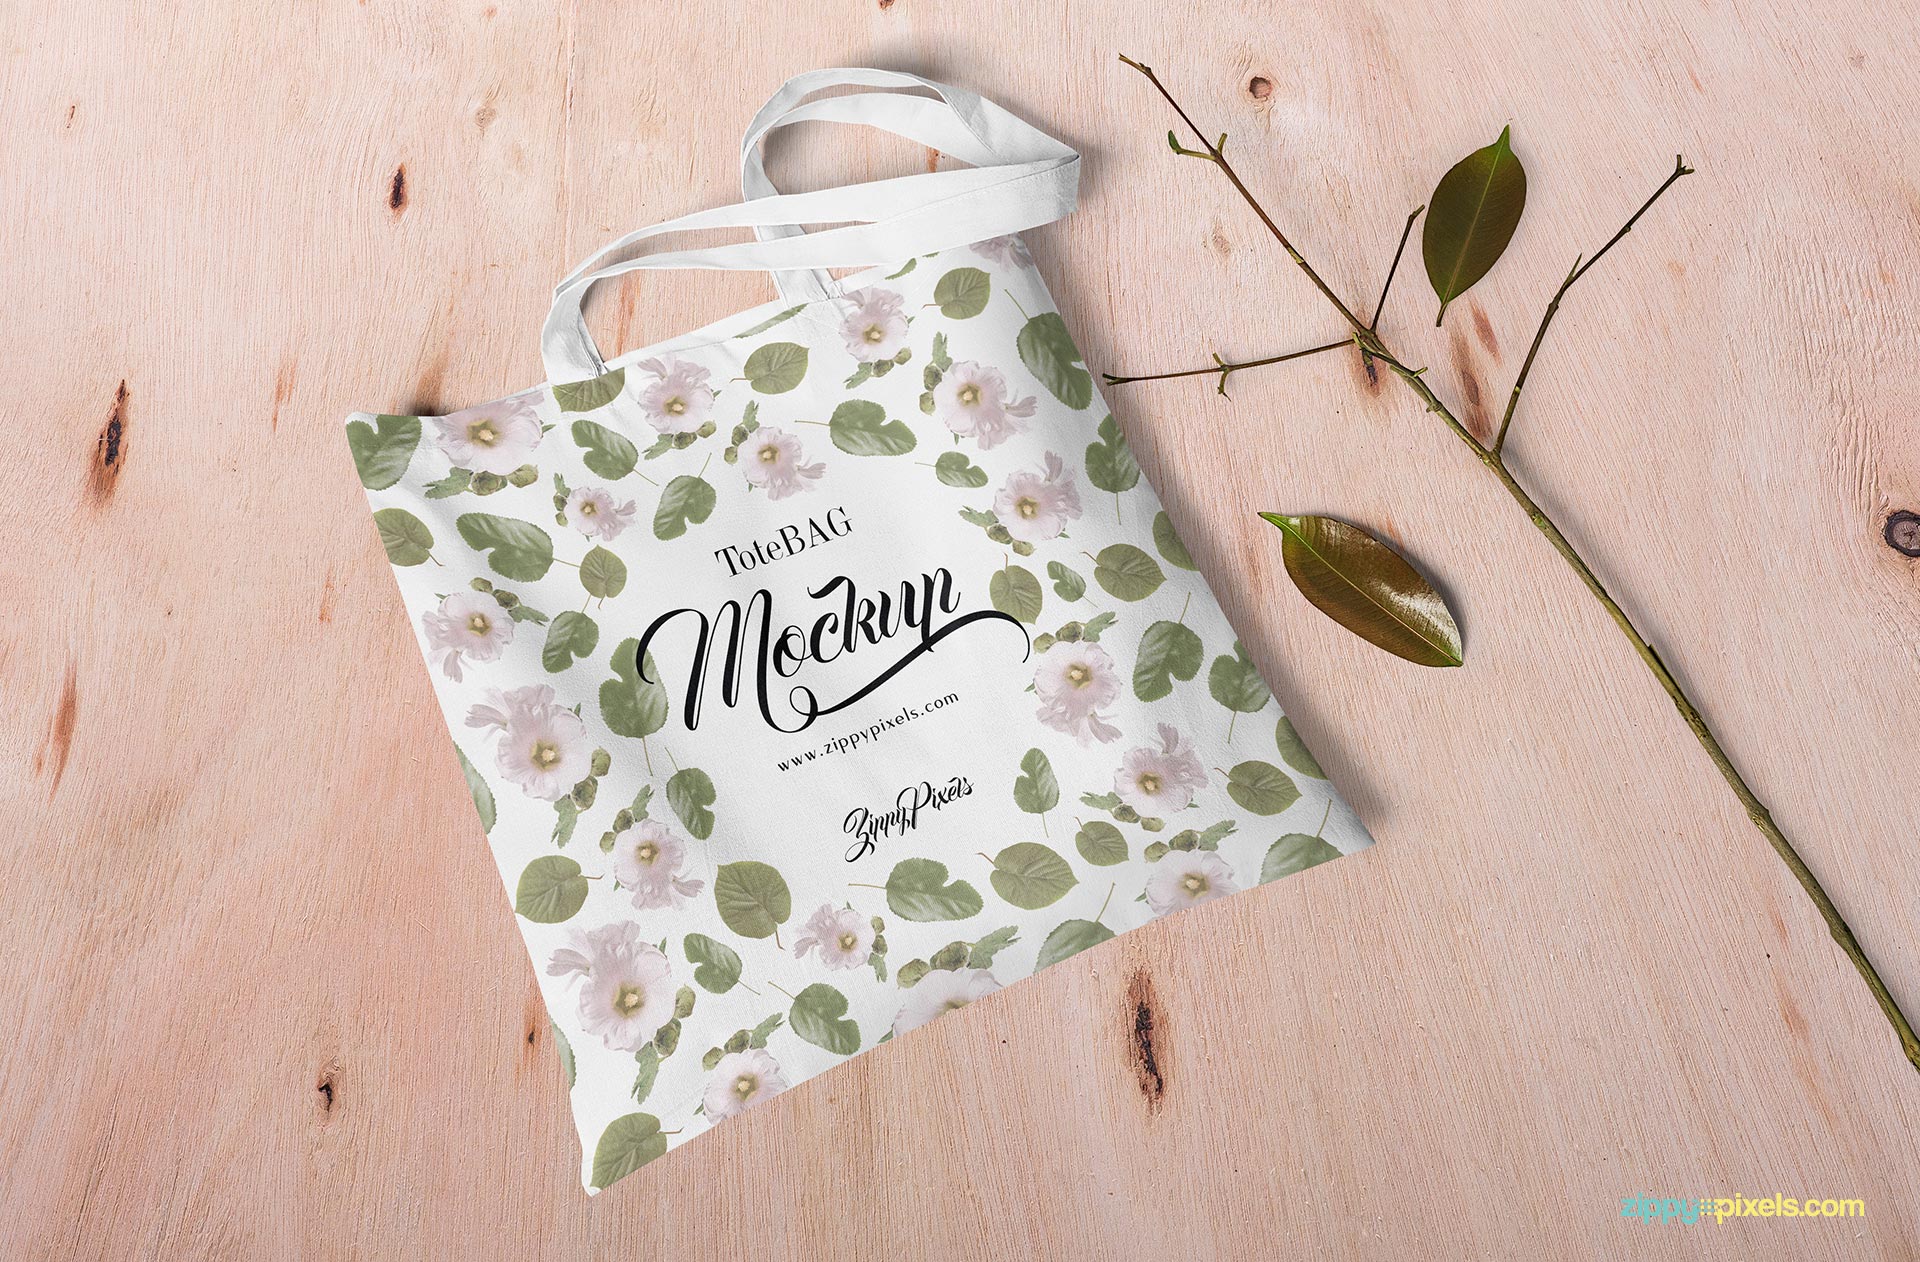 Free canvas bag mockup with an old wooden background.